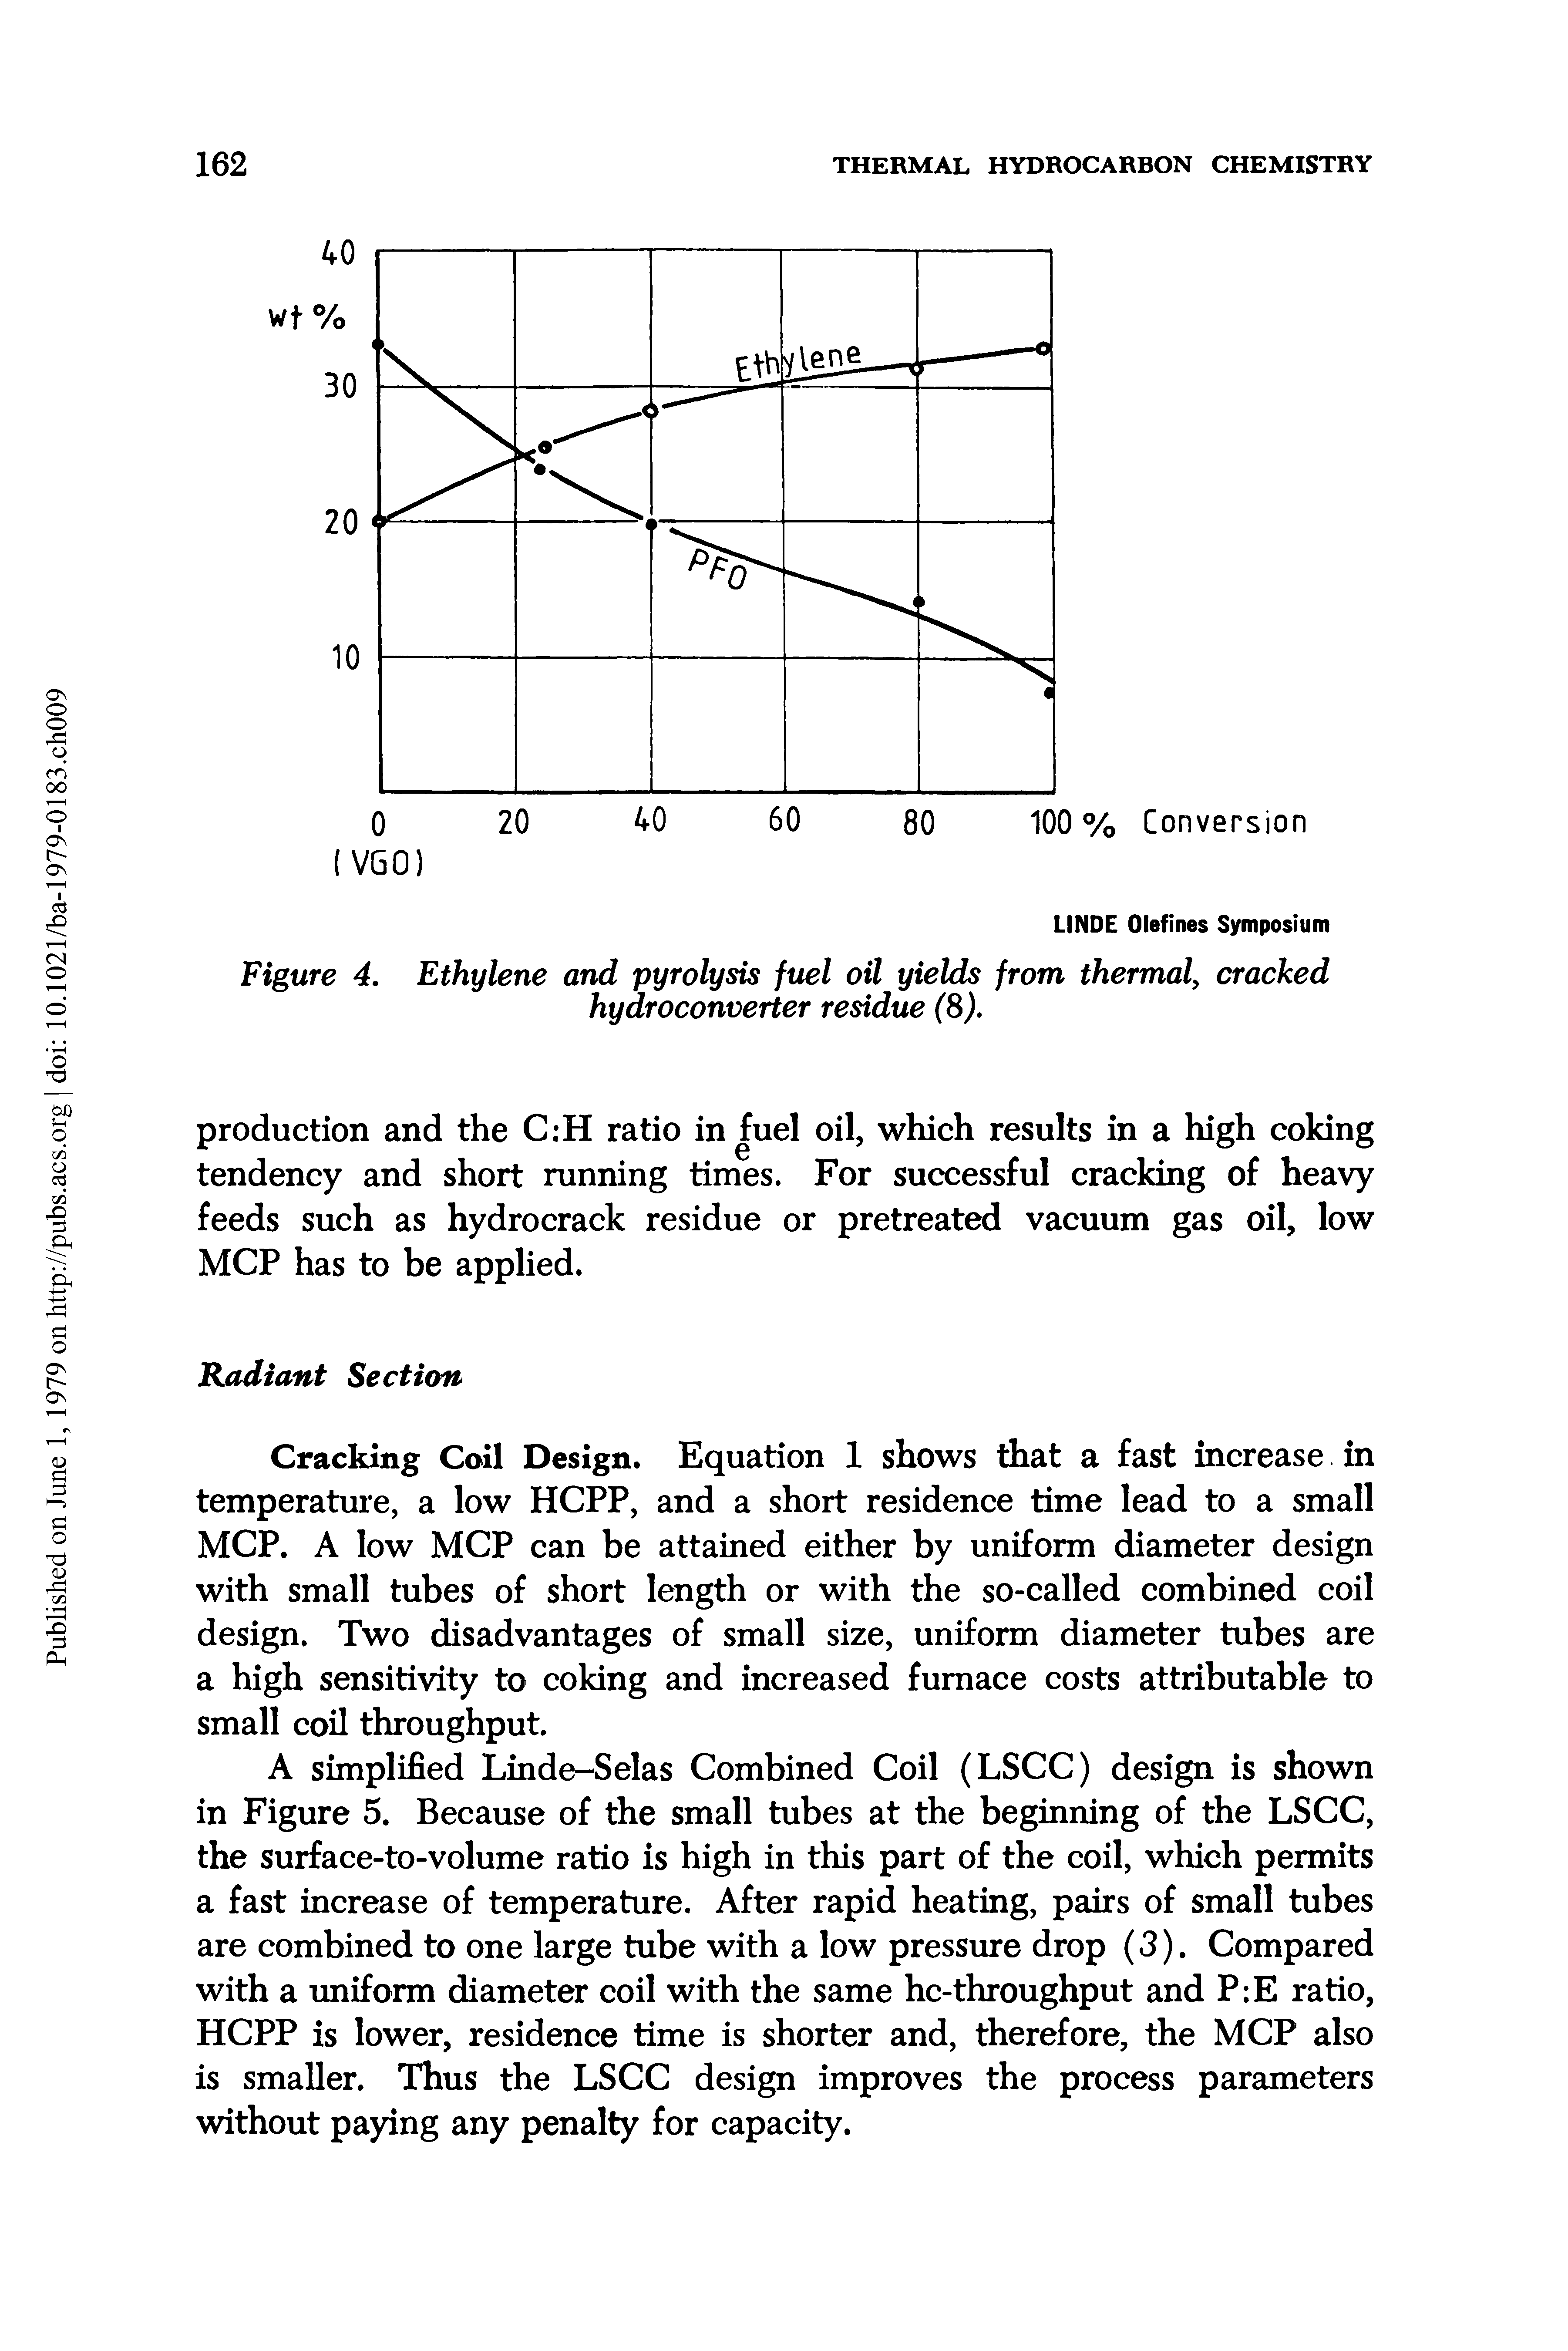 Figure 4. Ethylene and pyrolysis fuel oil yields from thermal, cracked hydroconverter residue (S).